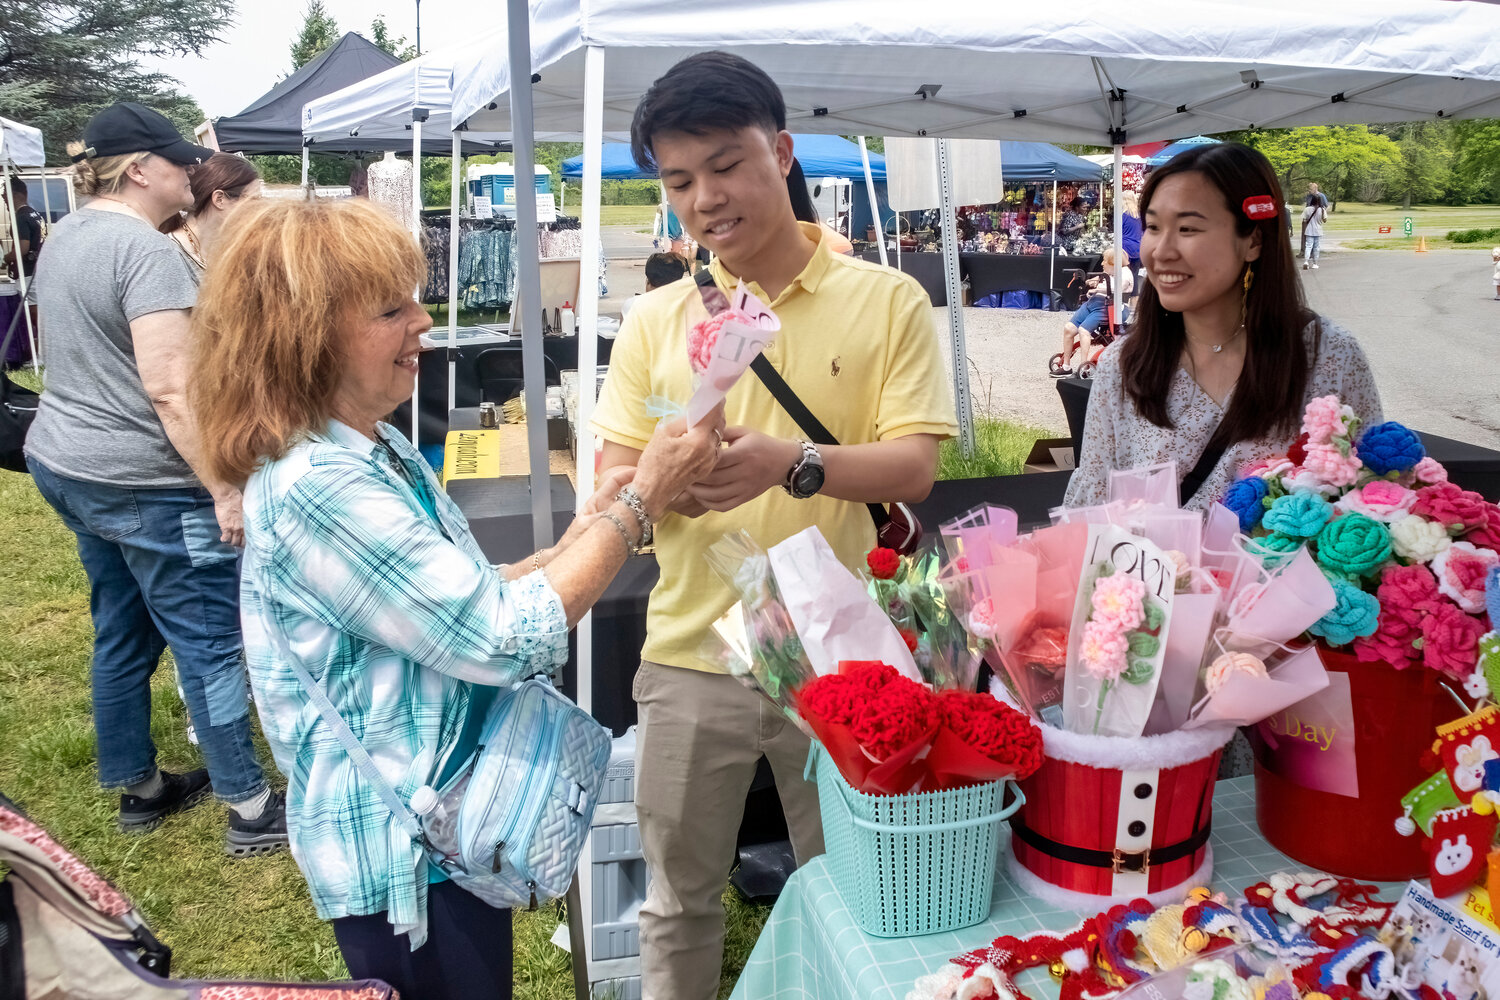 Nancy Palmer, left, from Baldwin checked out the handmade flowers by Alan Lu, center, and Macy Lai.